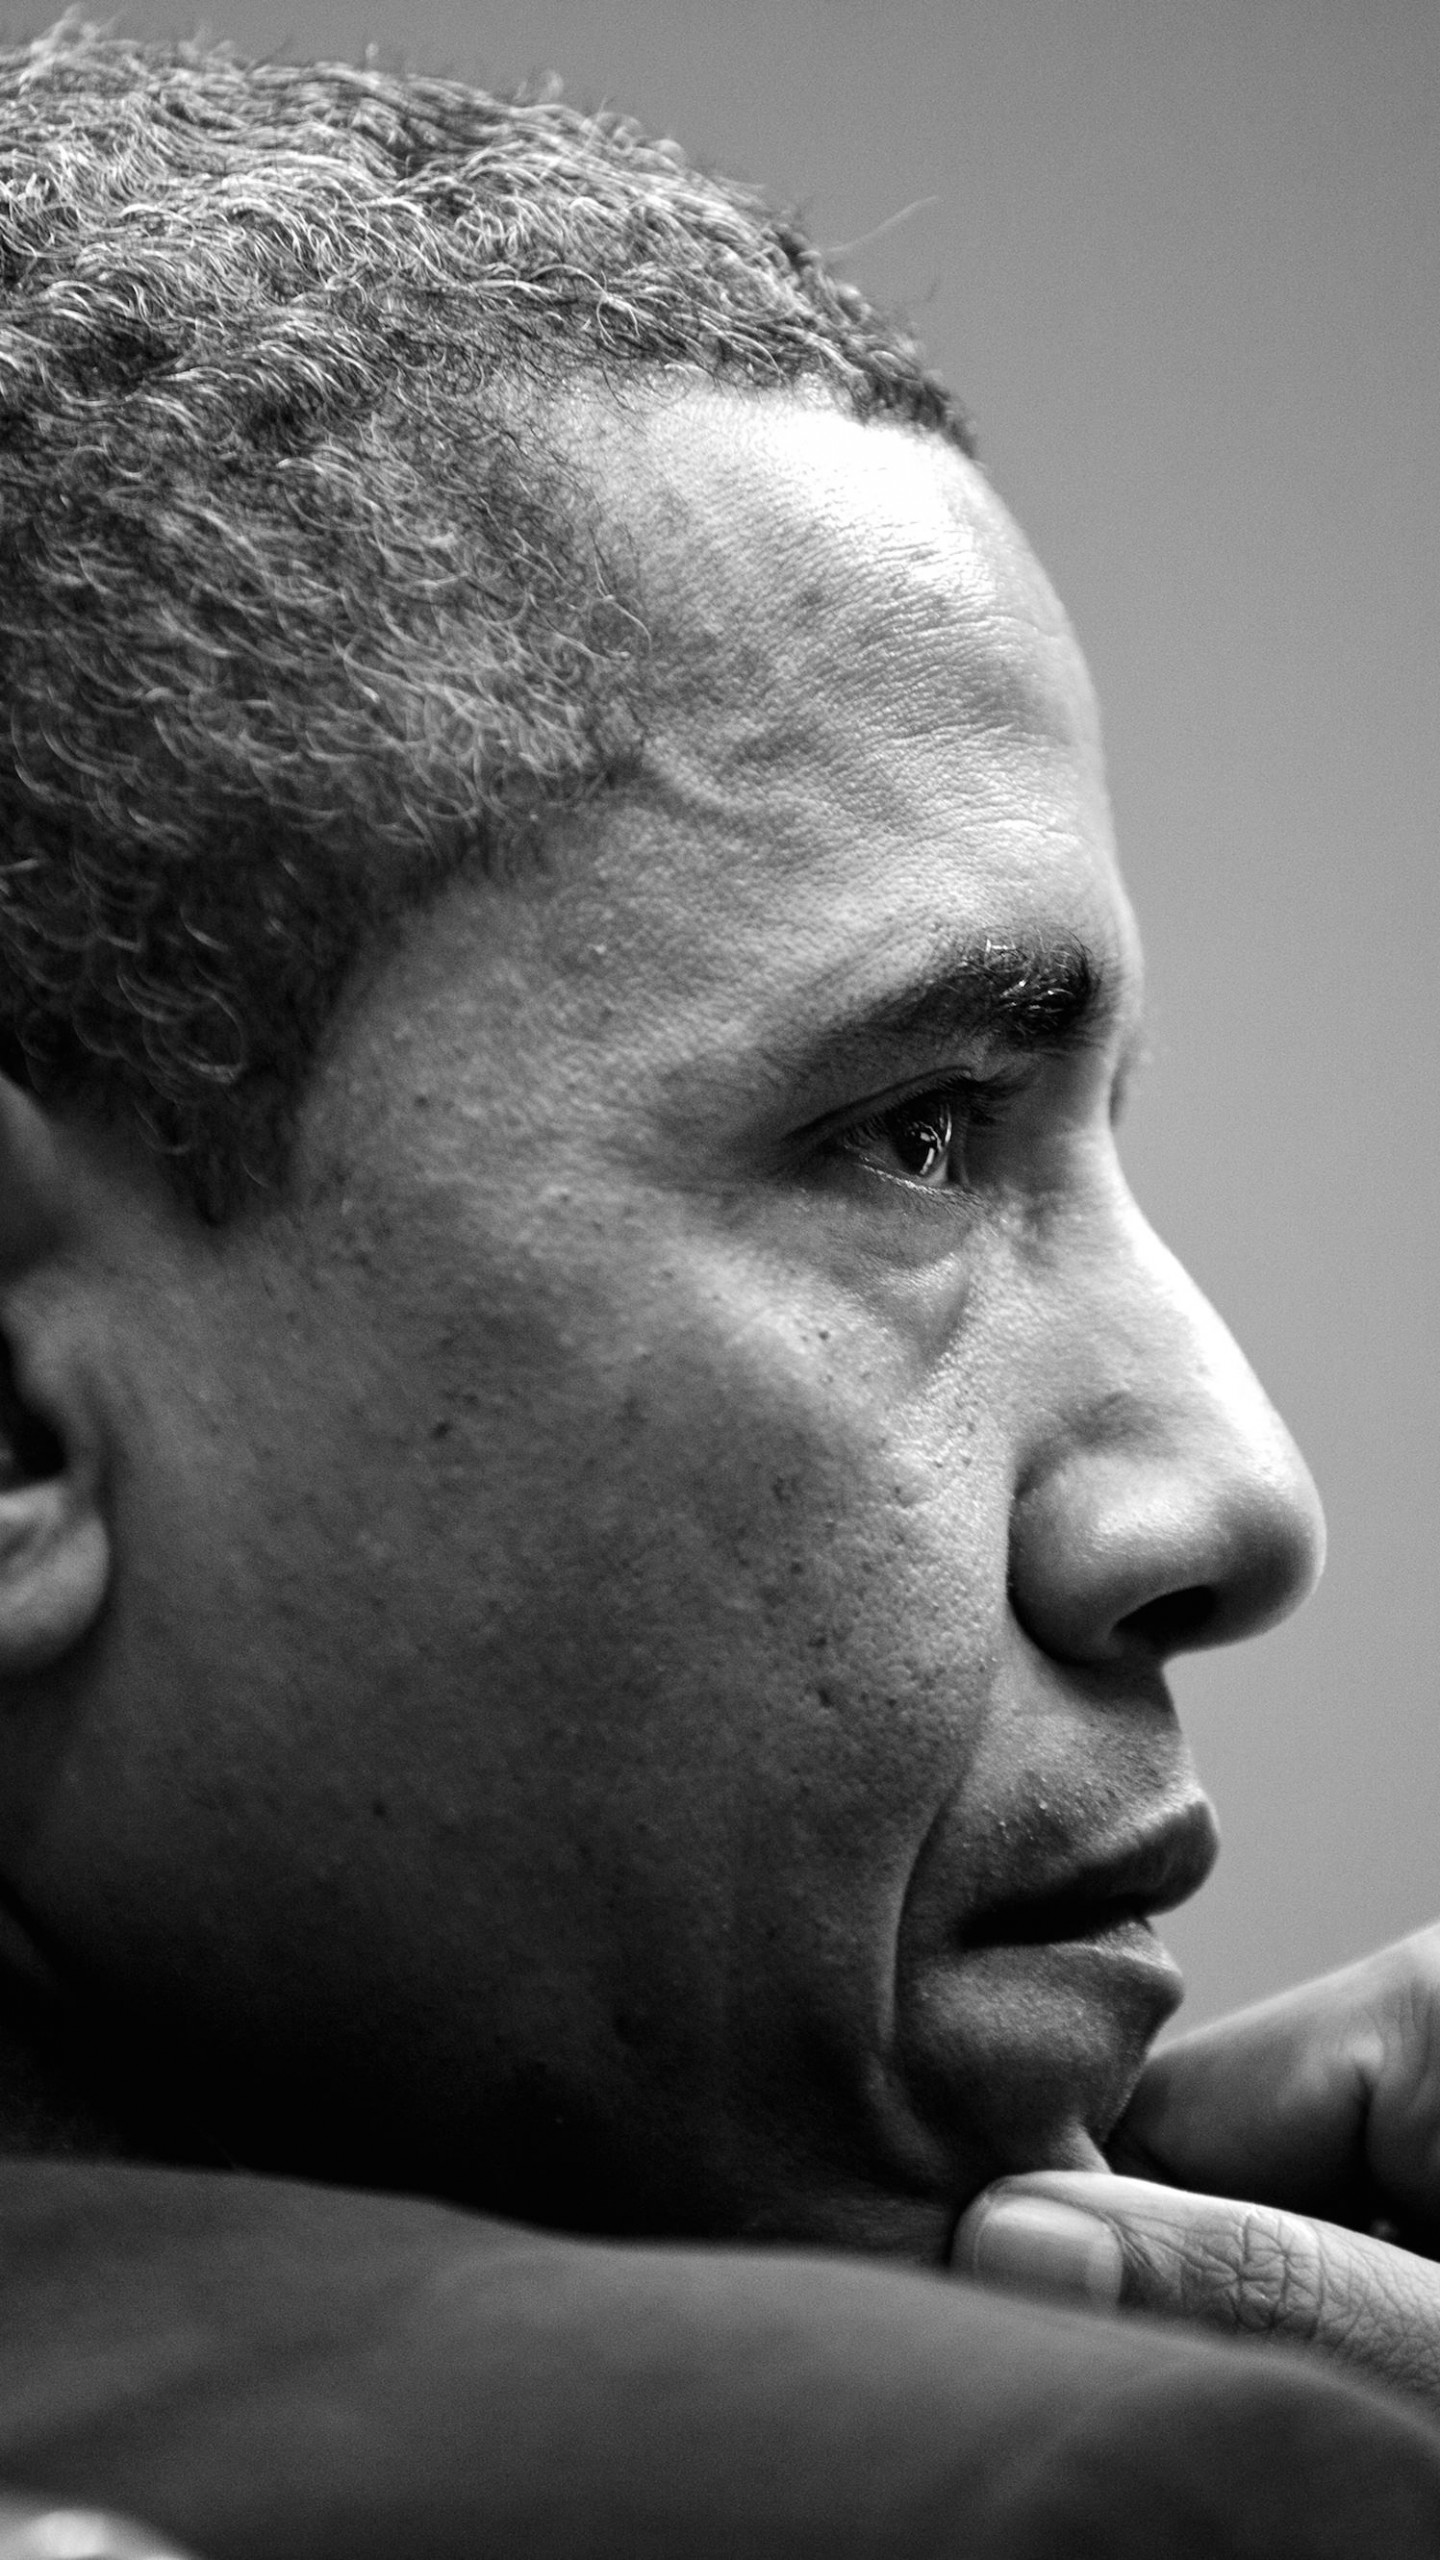 Barack Obama in Black & White Wallpaper for SAMSUNG Galaxy Note 4